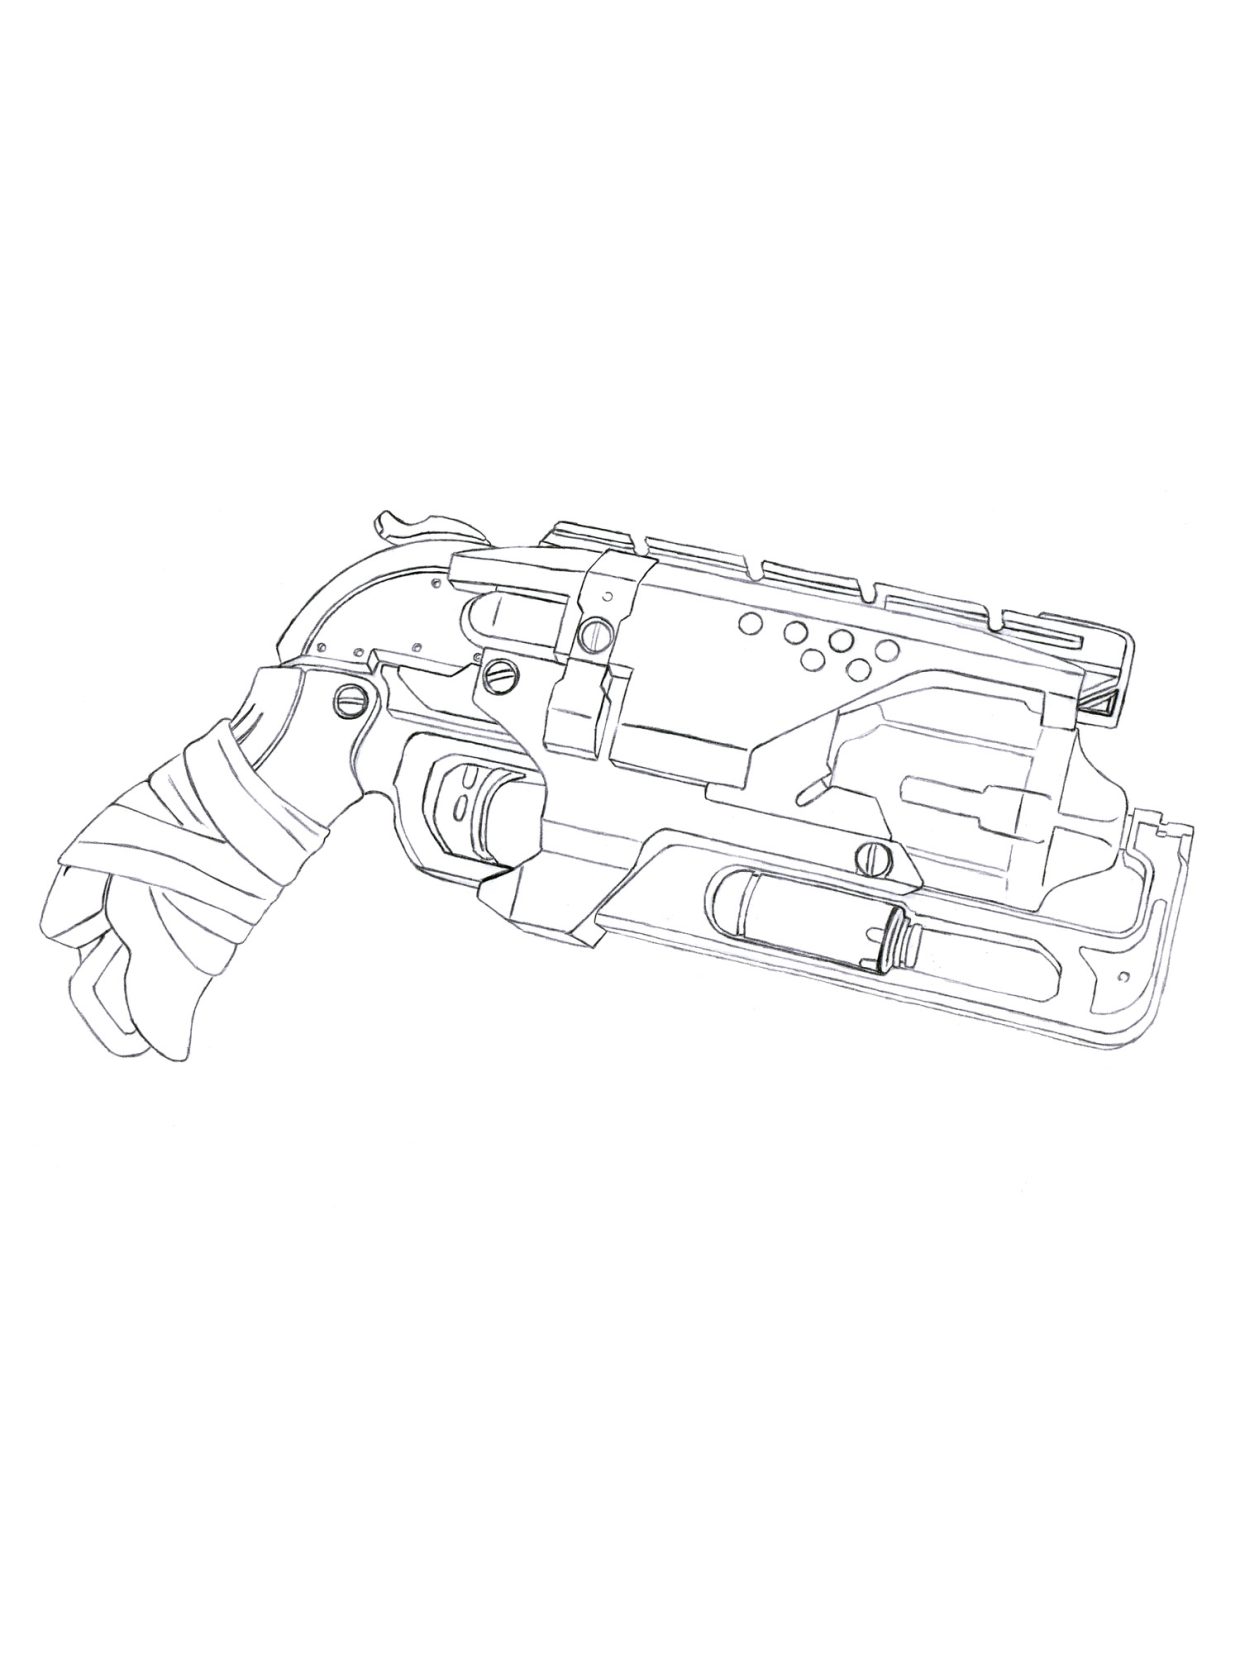 Nerf Gun Coloring Pages Free Printable and Easy to Color